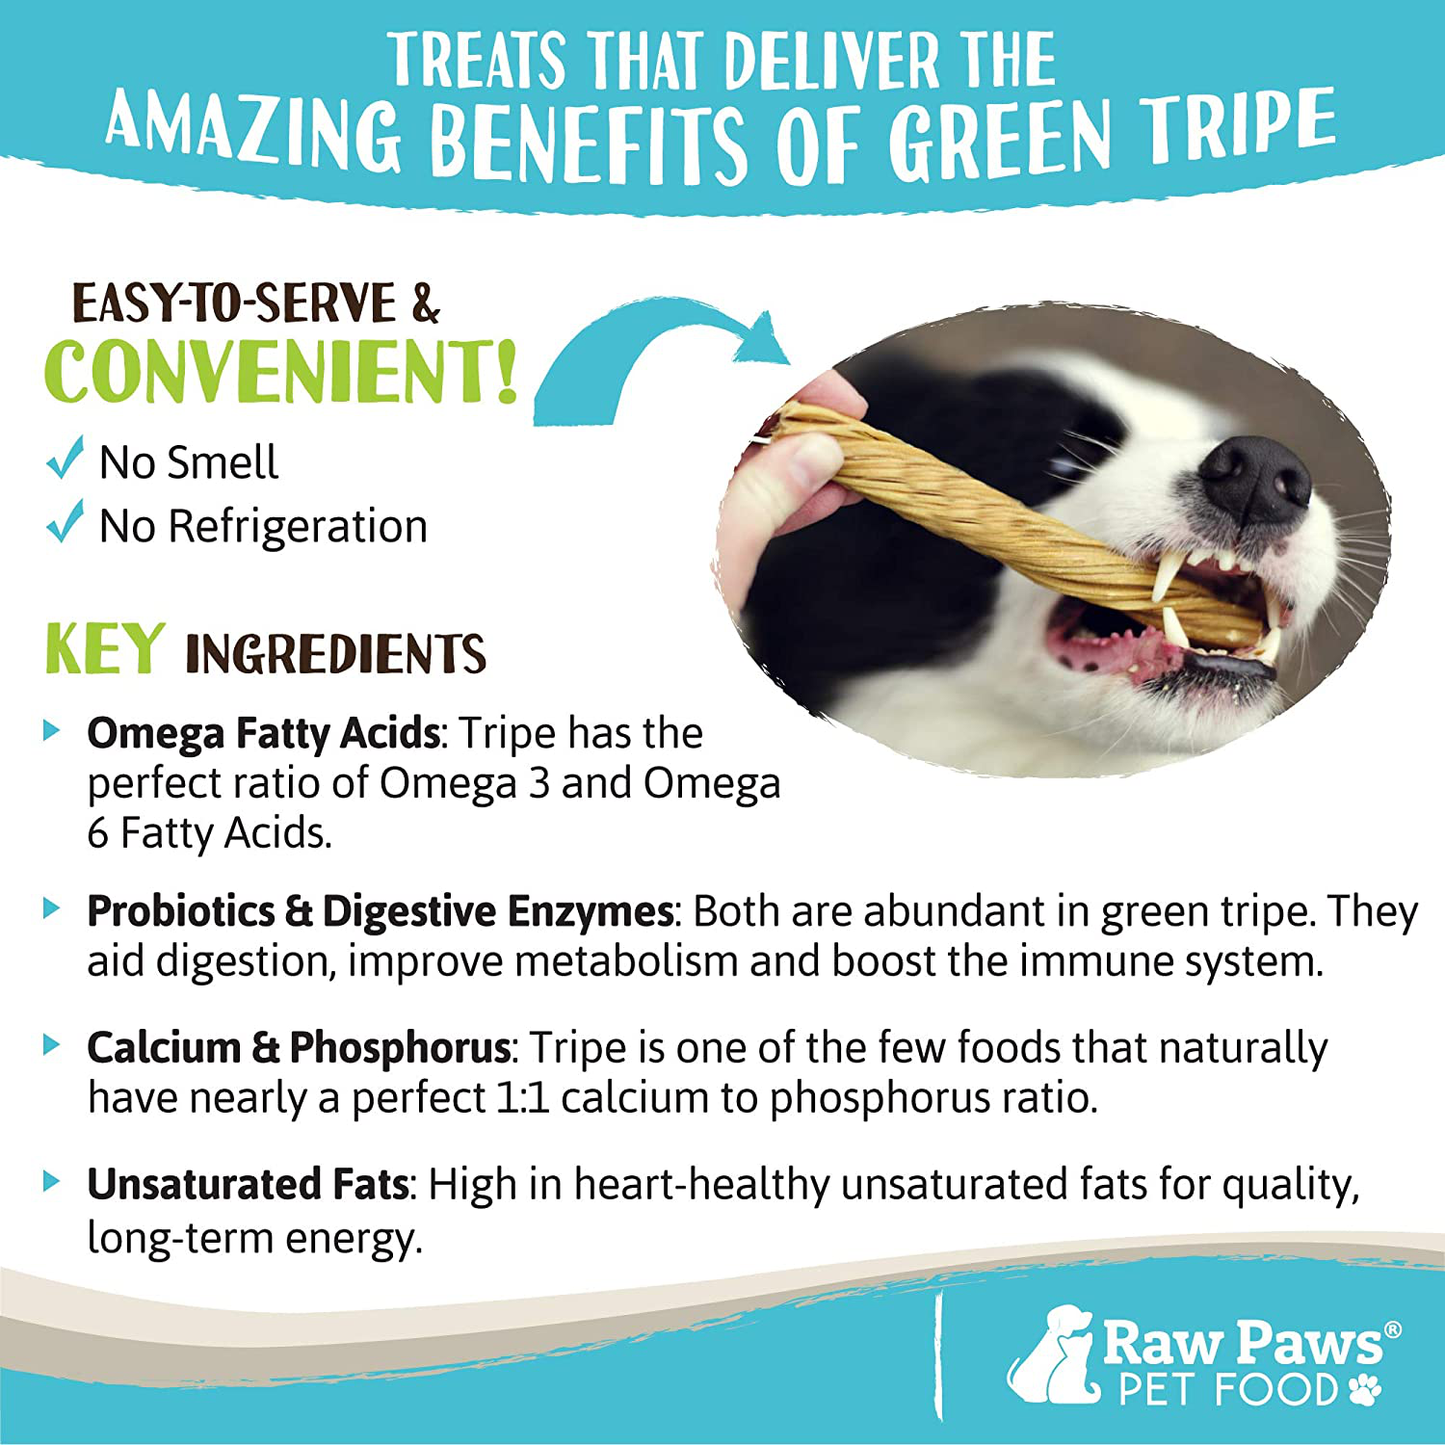 Raw Paws Premium 5" Green Beef Tripe Twists for Dogs - Packed in USA - Grass-Fed, Free-Range Green Tripe Sticks for Dogs - Odor-Free, Crunchy Tripe Dog Treats - All-Natural Tripe Sticks Chews